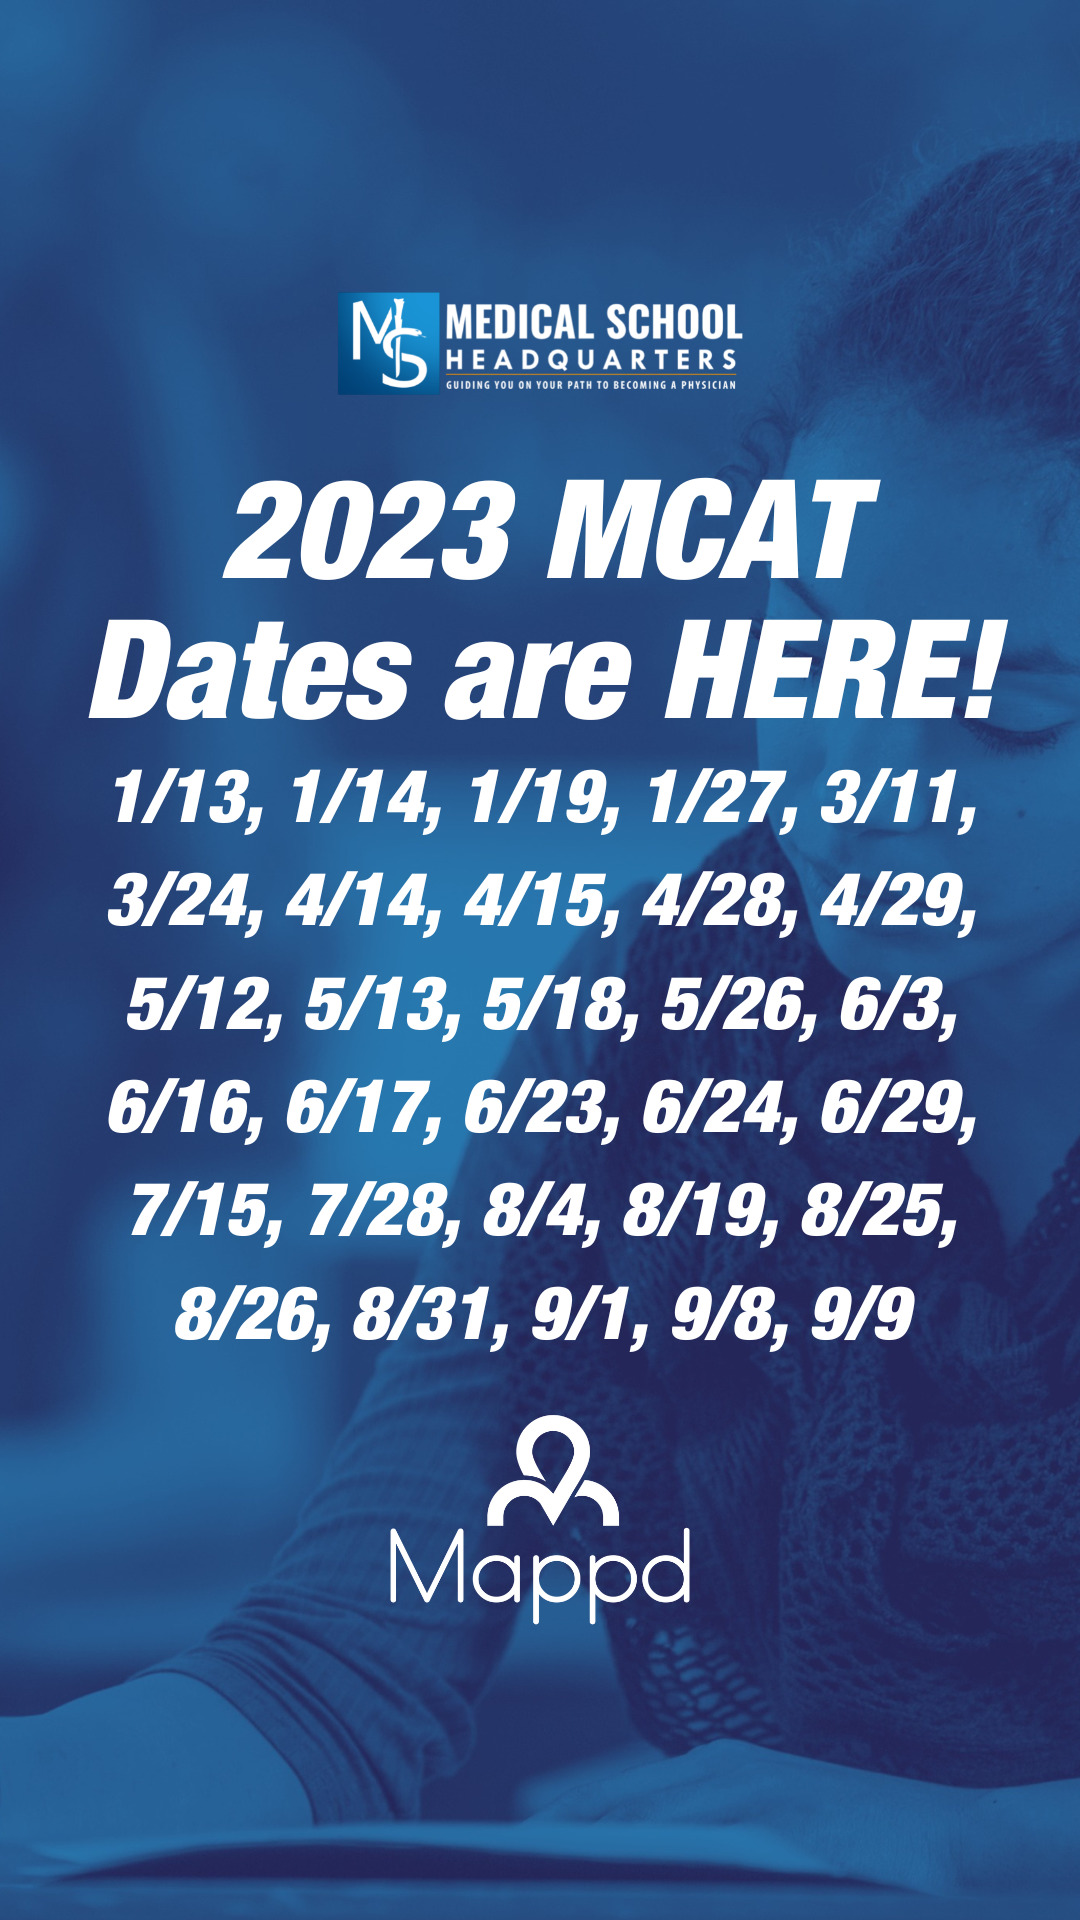 What You Need to Know About MCAT Registration (2023) Medical School